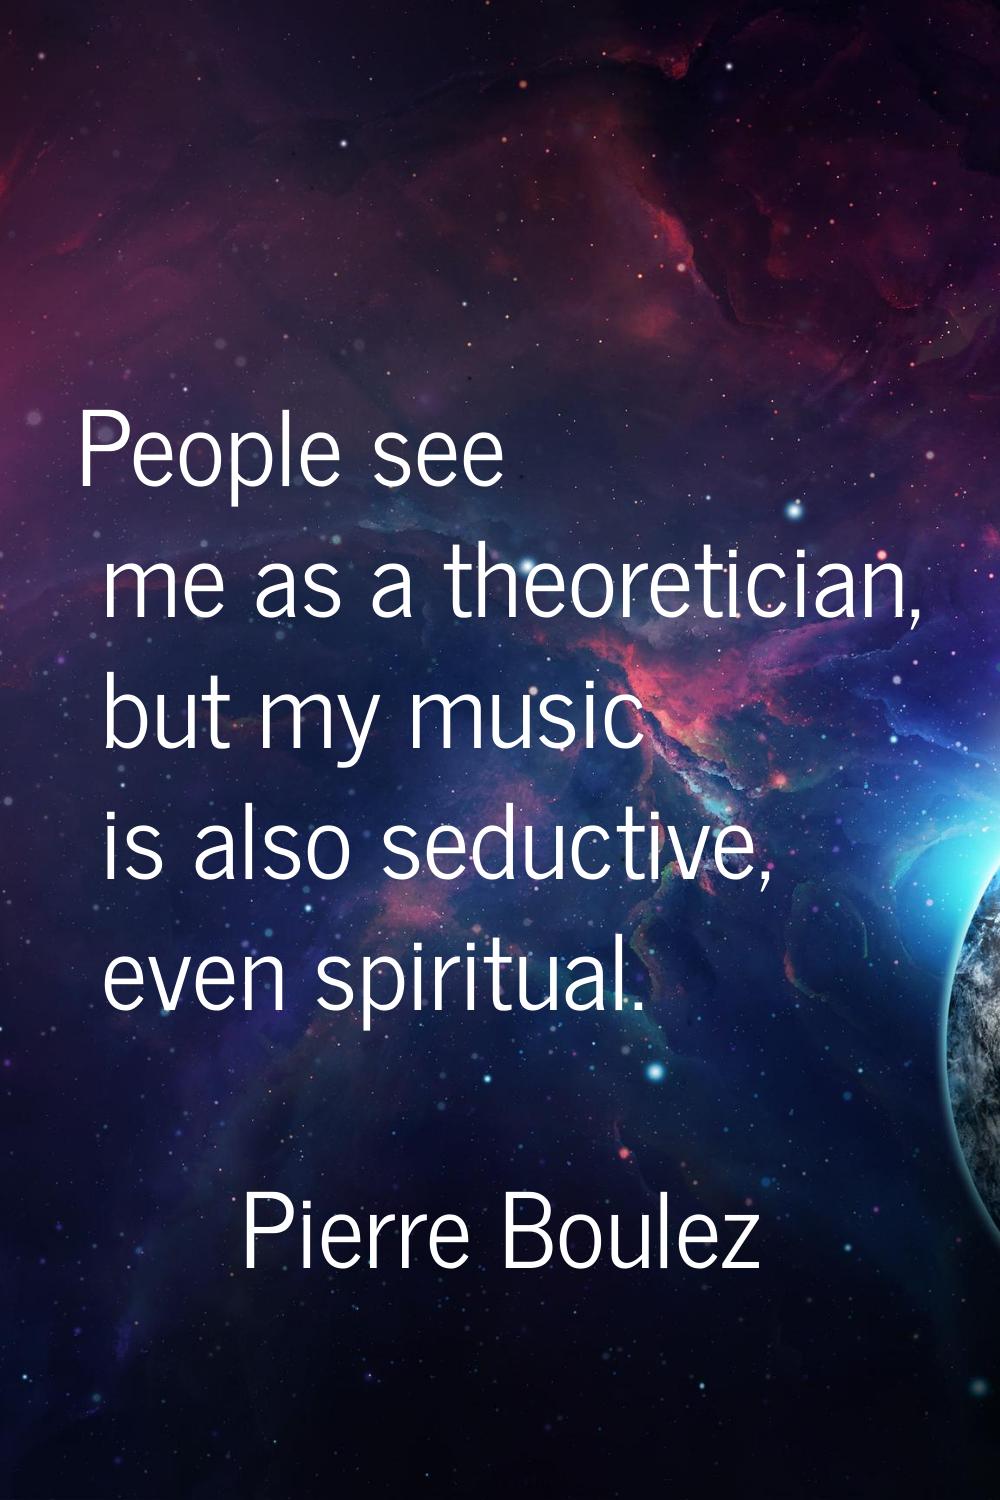 People see me as a theoretician, but my music is also seductive, even spiritual.